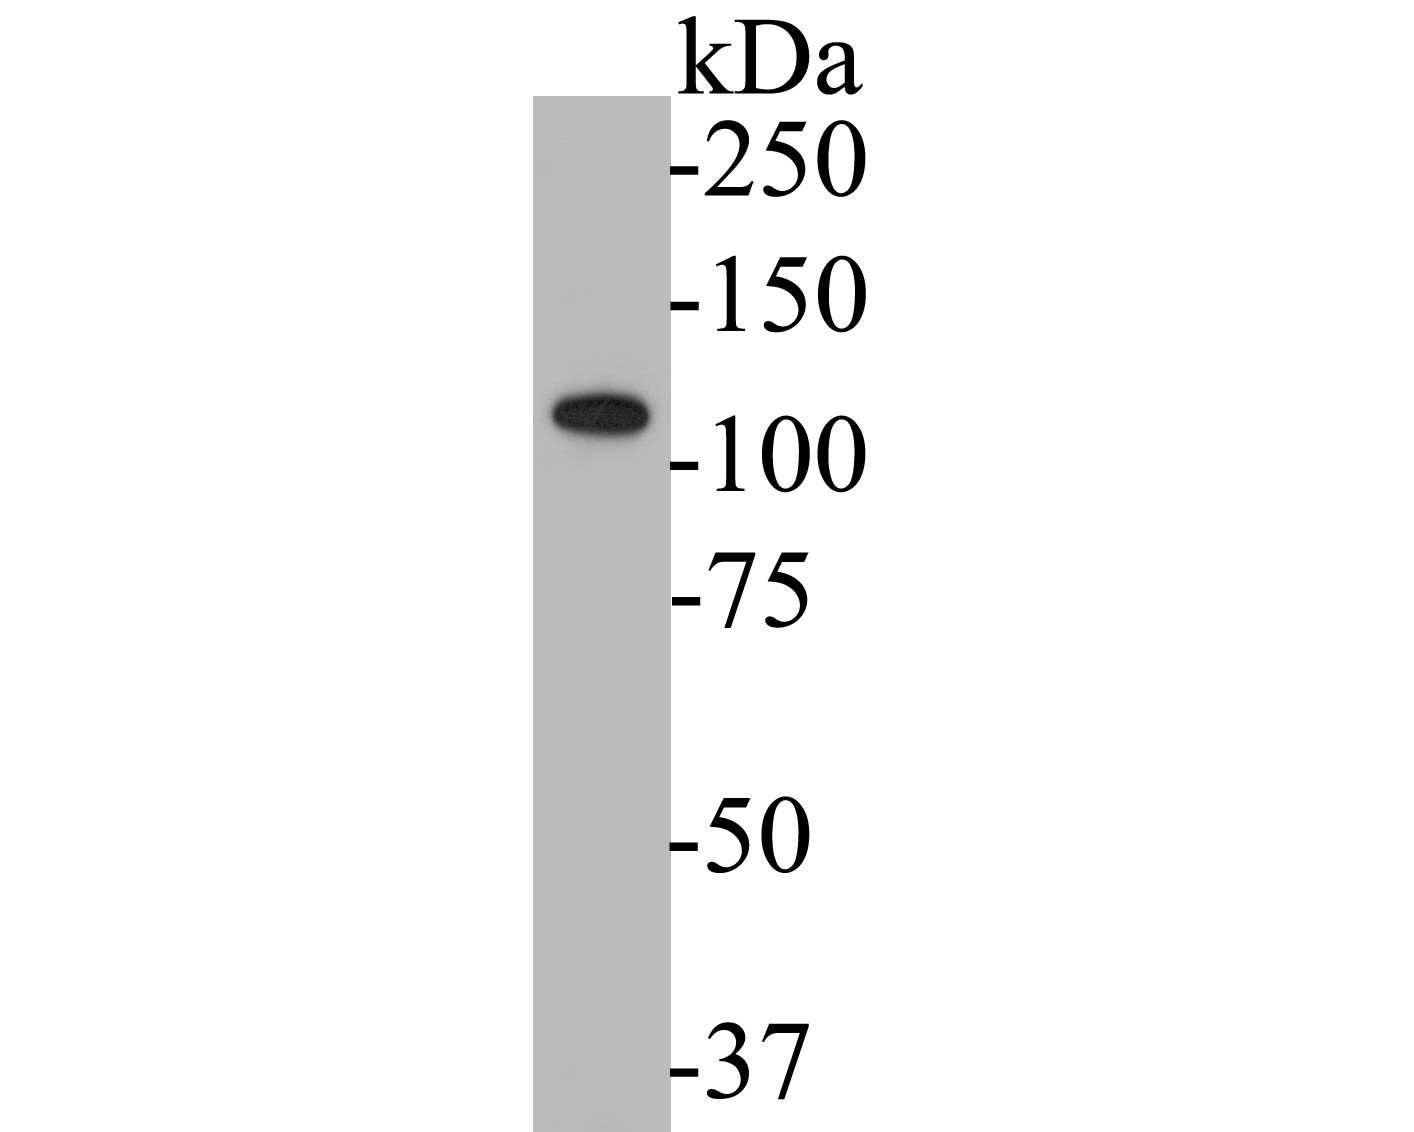 Western blot analysis of KV2.2 on SH-SY5Y cell lysates. Proteins were transferred to a PVDF membrane and blocked with 5% BSA in PBS for 1 hour at room temperature. The primary antibody (ER1901-55, 1/500) was used in 5% BSA at room temperature for 2 hours. Goat Anti-Rabbit IgG - HRP Secondary Antibody (HA1001) at 1:5,000 dilution was used for 1 hour at room temperature.